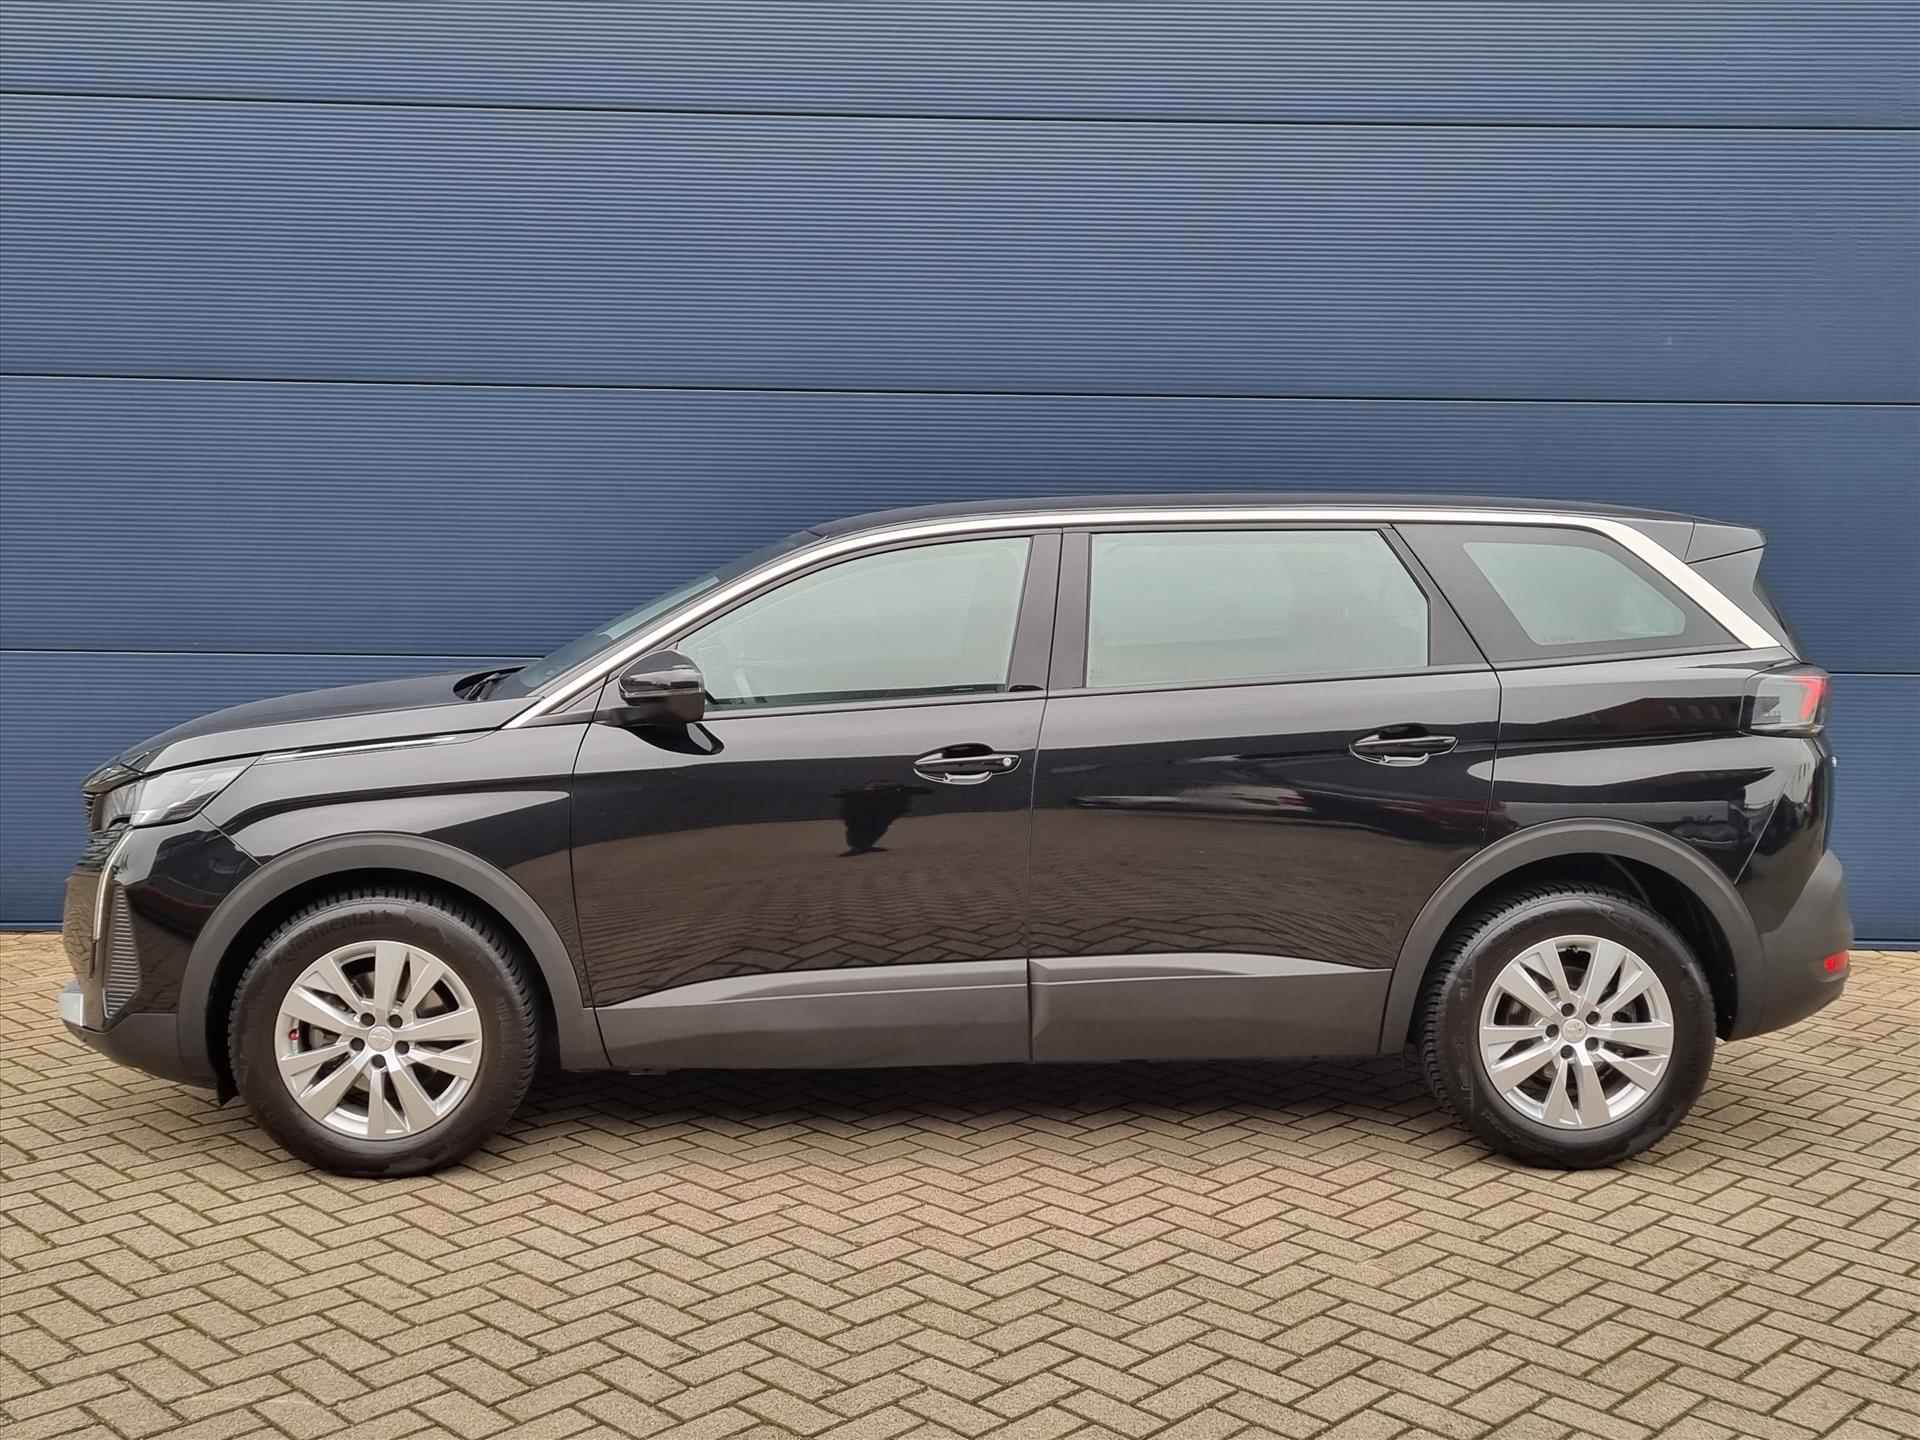 PEUGEOT 5008 1.2 Turbo 130pk Active Pack Business Automaat | Navigatie | Camera | All Season Banden | 7-Persoons | Climate Control | Parkeersensoren V+A | - 2/46